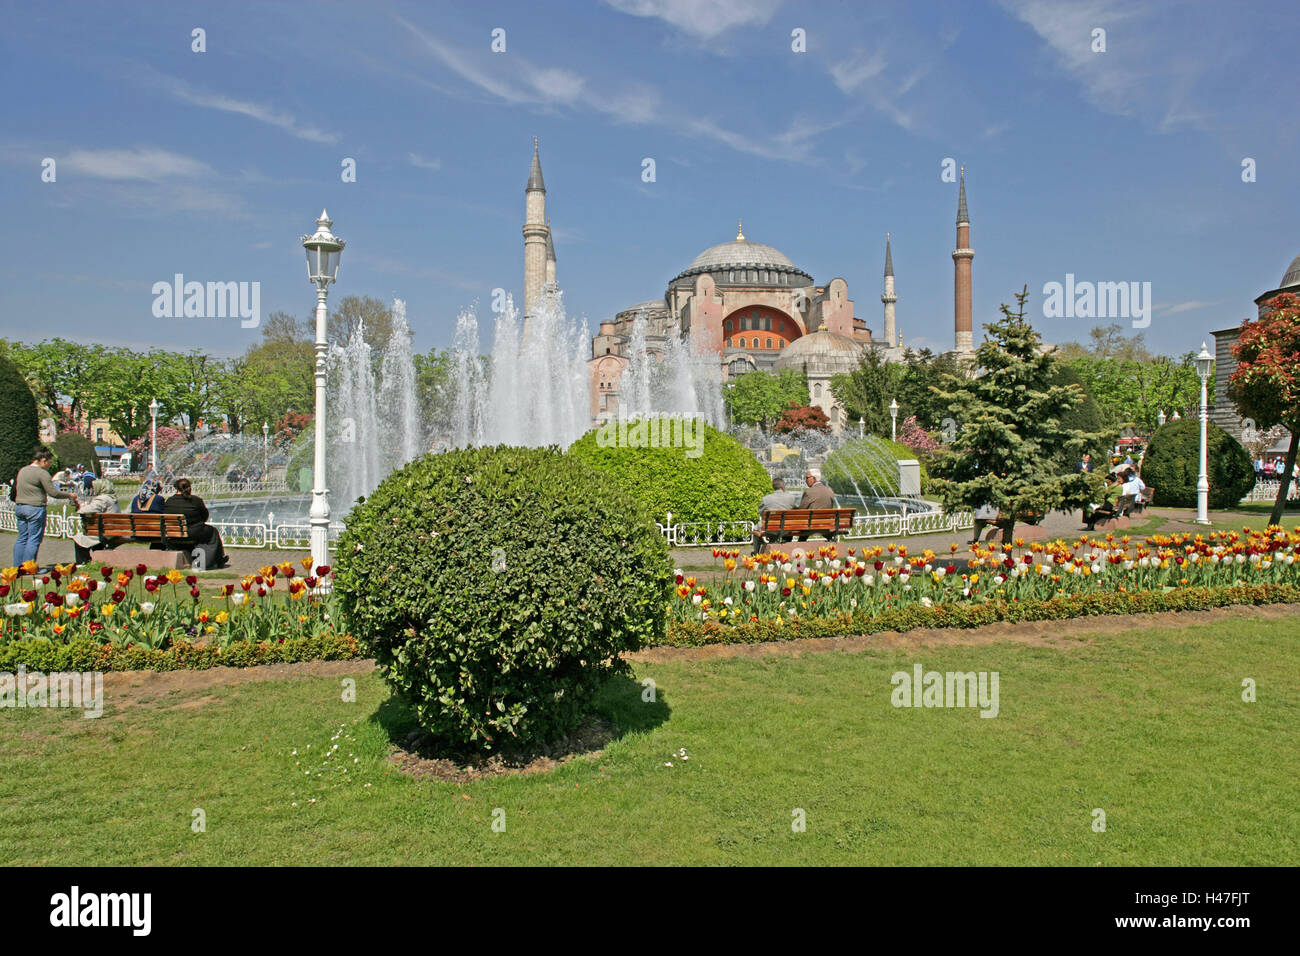 Turkey, Istanbul, Hagia Sophia museum, outside, town, museum, mosque, minarets, Islam, religion, faith, world religion, place of interest, tourism, flowers, spring flowers, tulips, brightly, people, tourists, Stock Photo